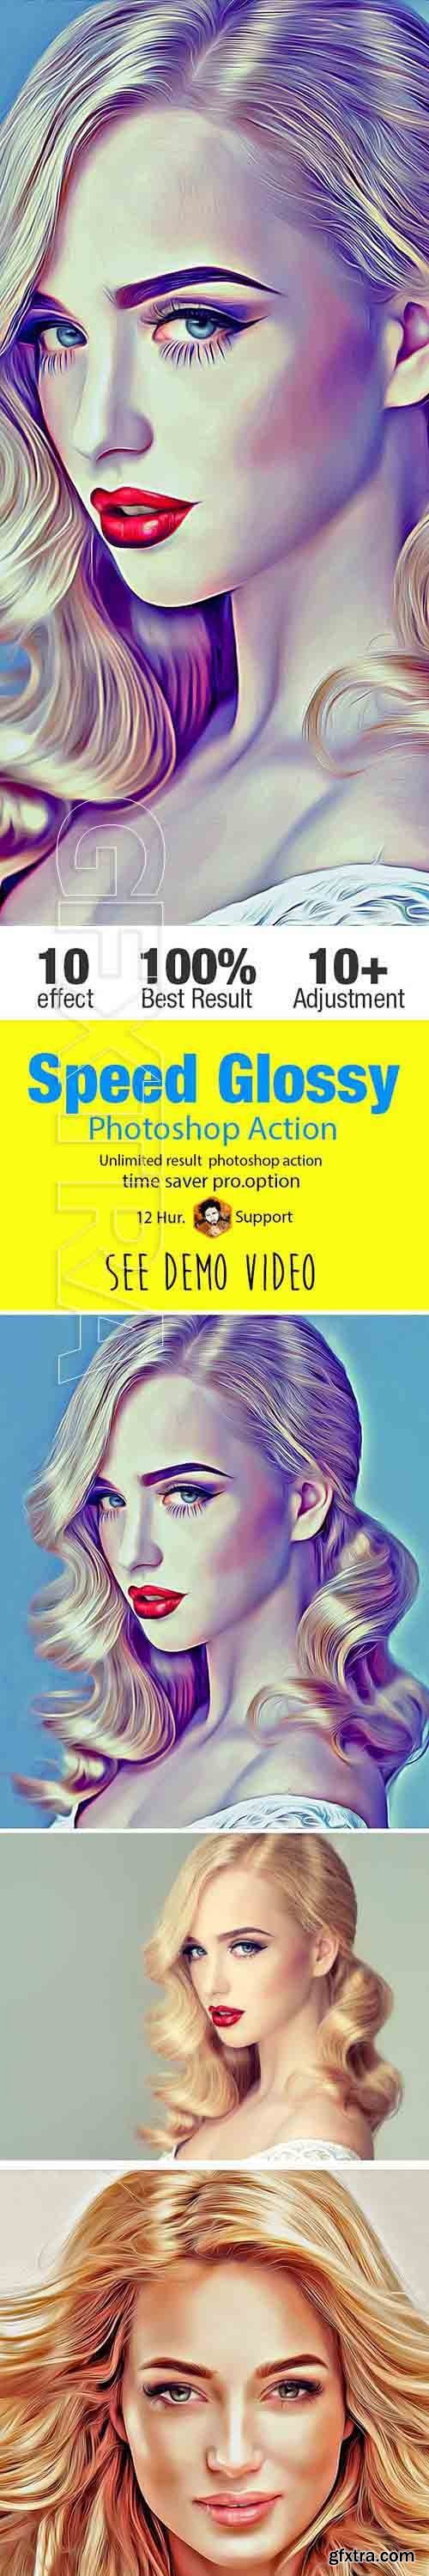 GraphicRiver - Speed Glossy Art Action 21140064